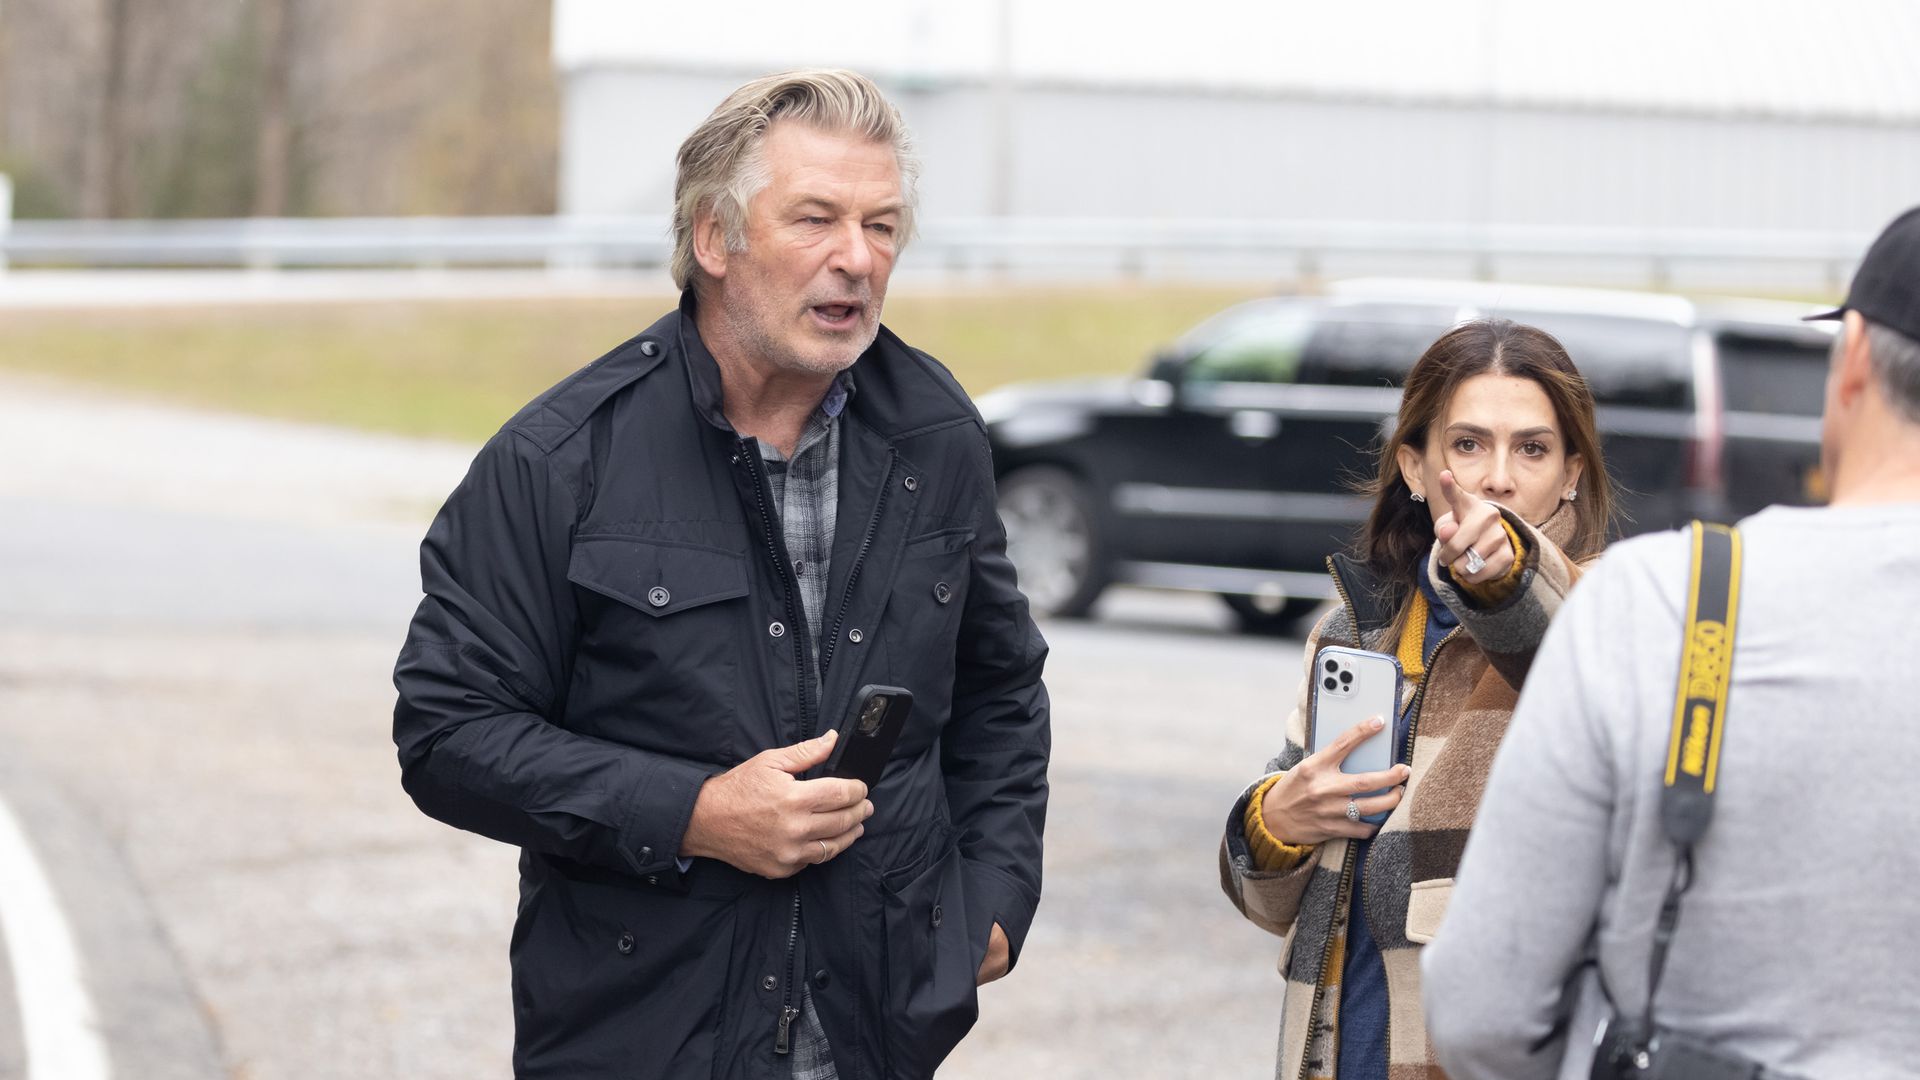 Alec Baldwin and Hilaria Baldwin speak for the first time regarding the accidental shooting that killed cinematographer Halyna Hutchins.